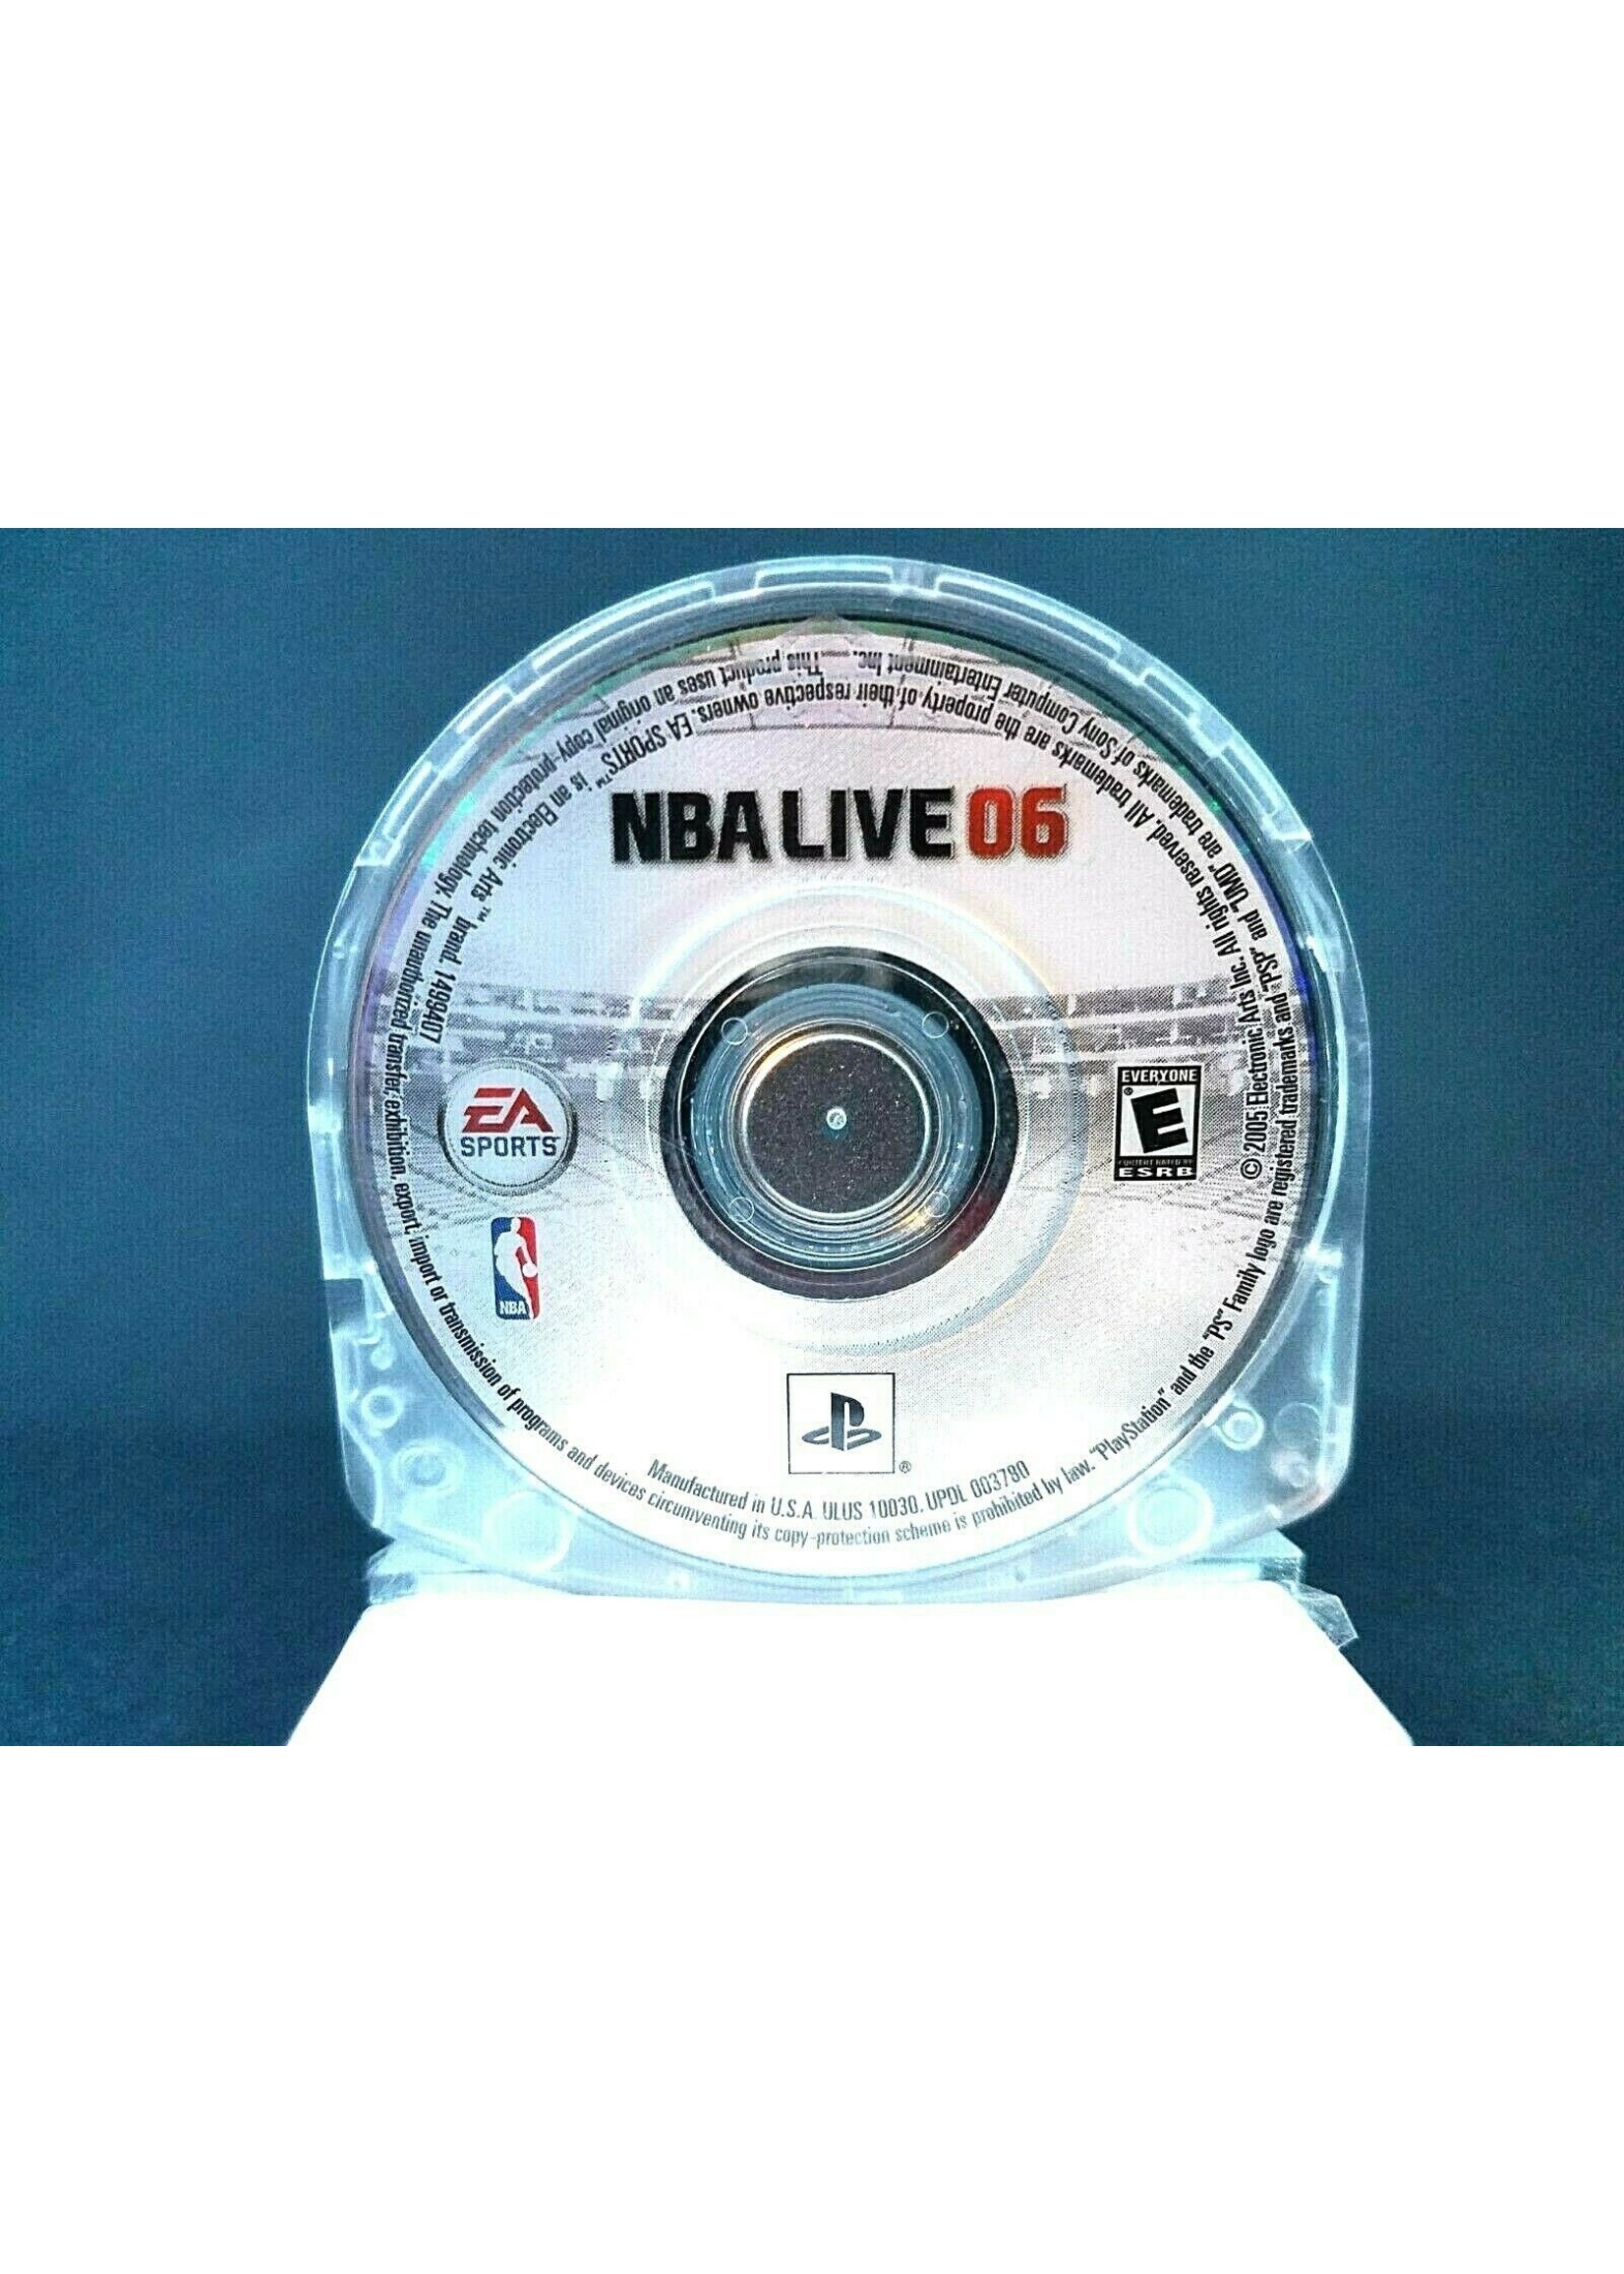 Sony Playstation Portable (PSP) NBA Live 06 - (Game Only)